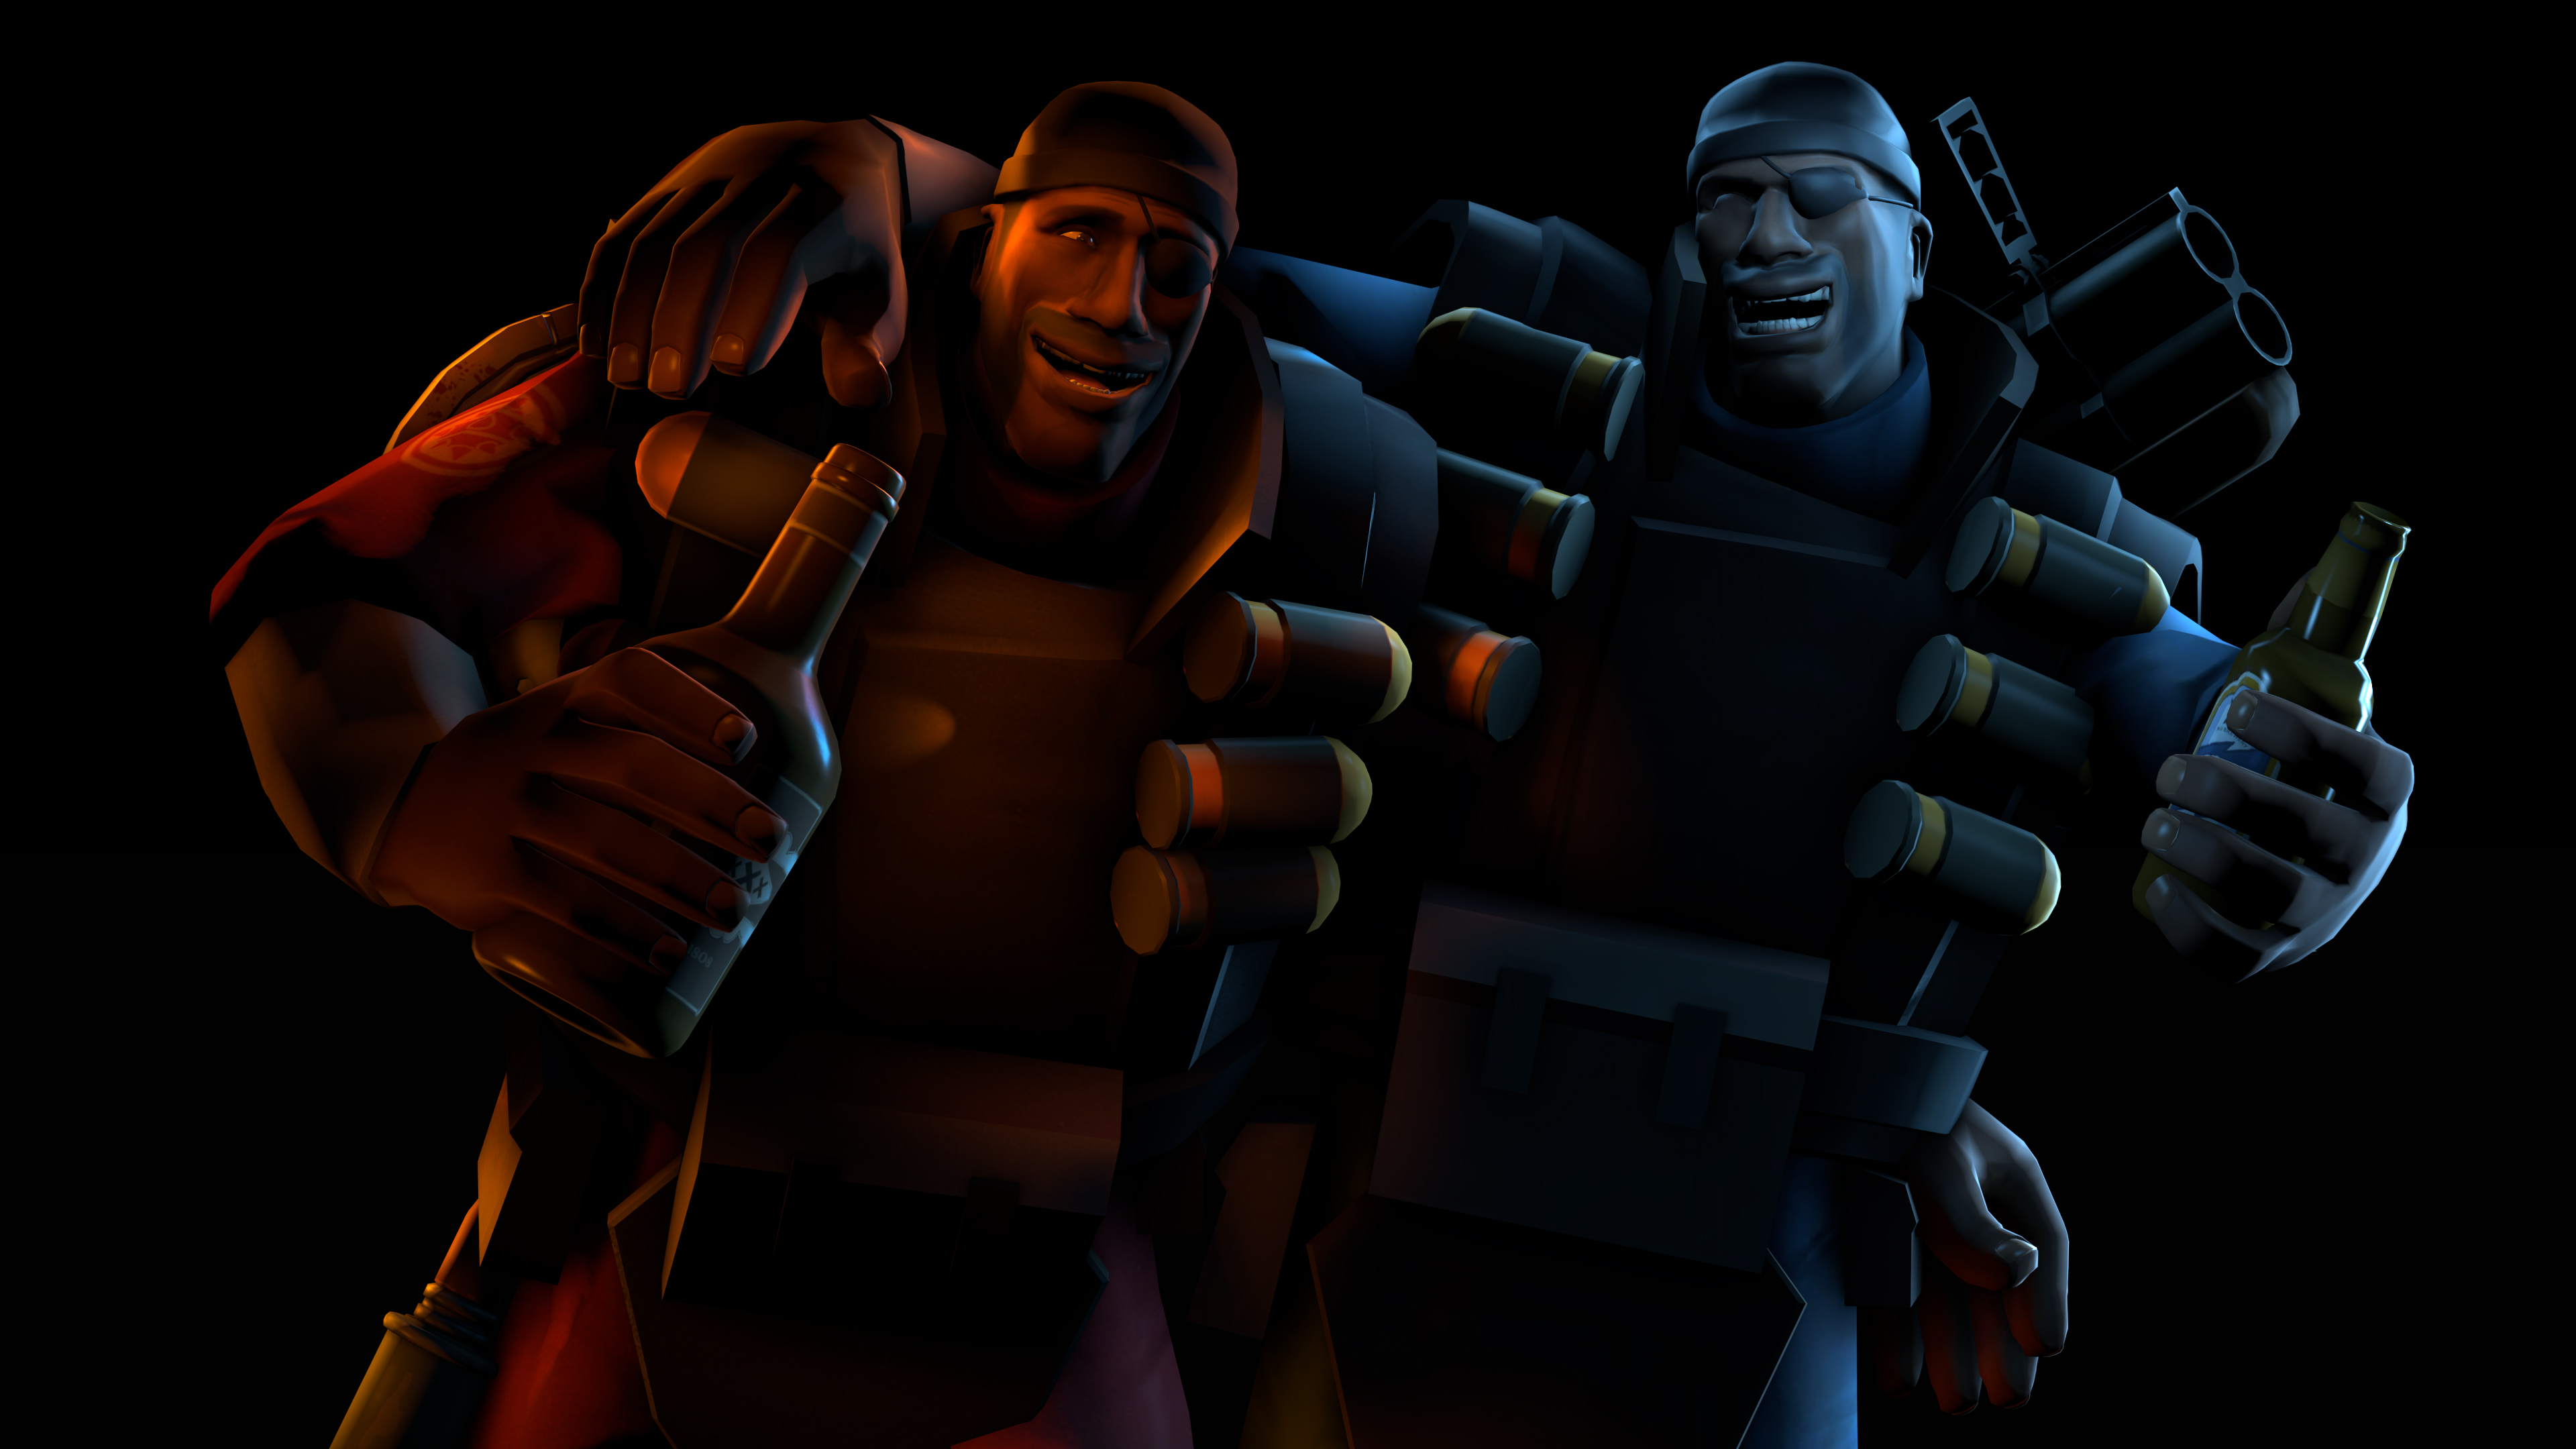 Team Fortress 2 Backgrounds, Pictures, Images